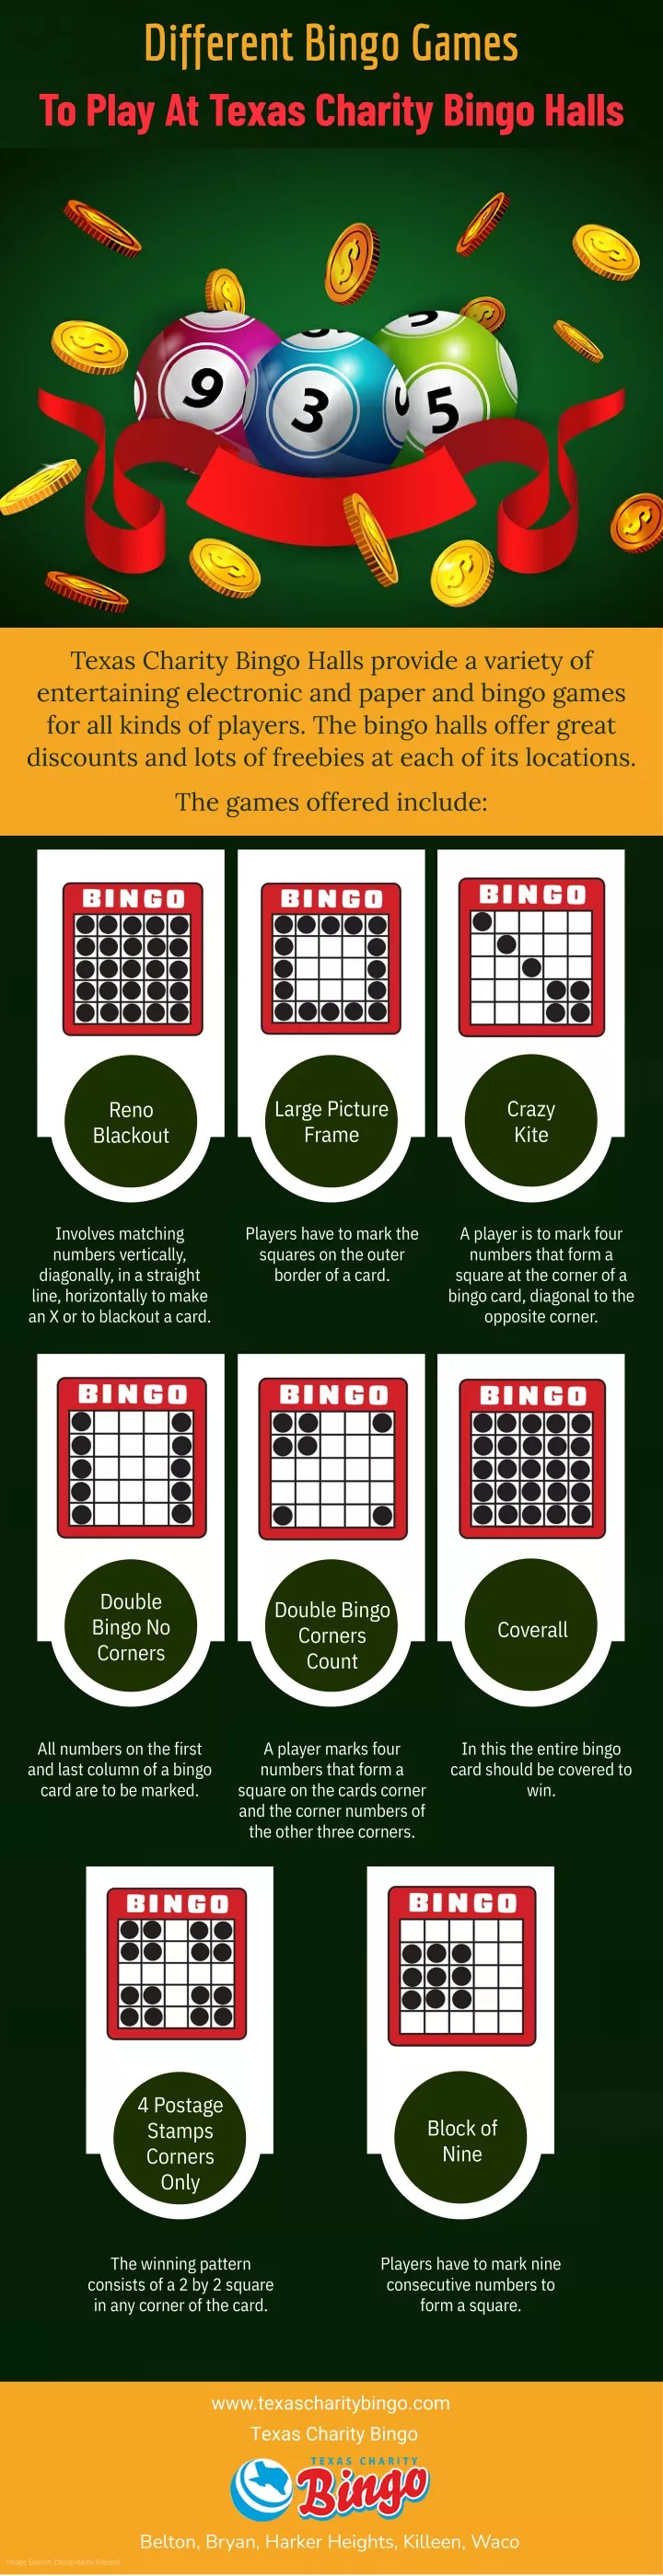 different bingo games to play at texas charity